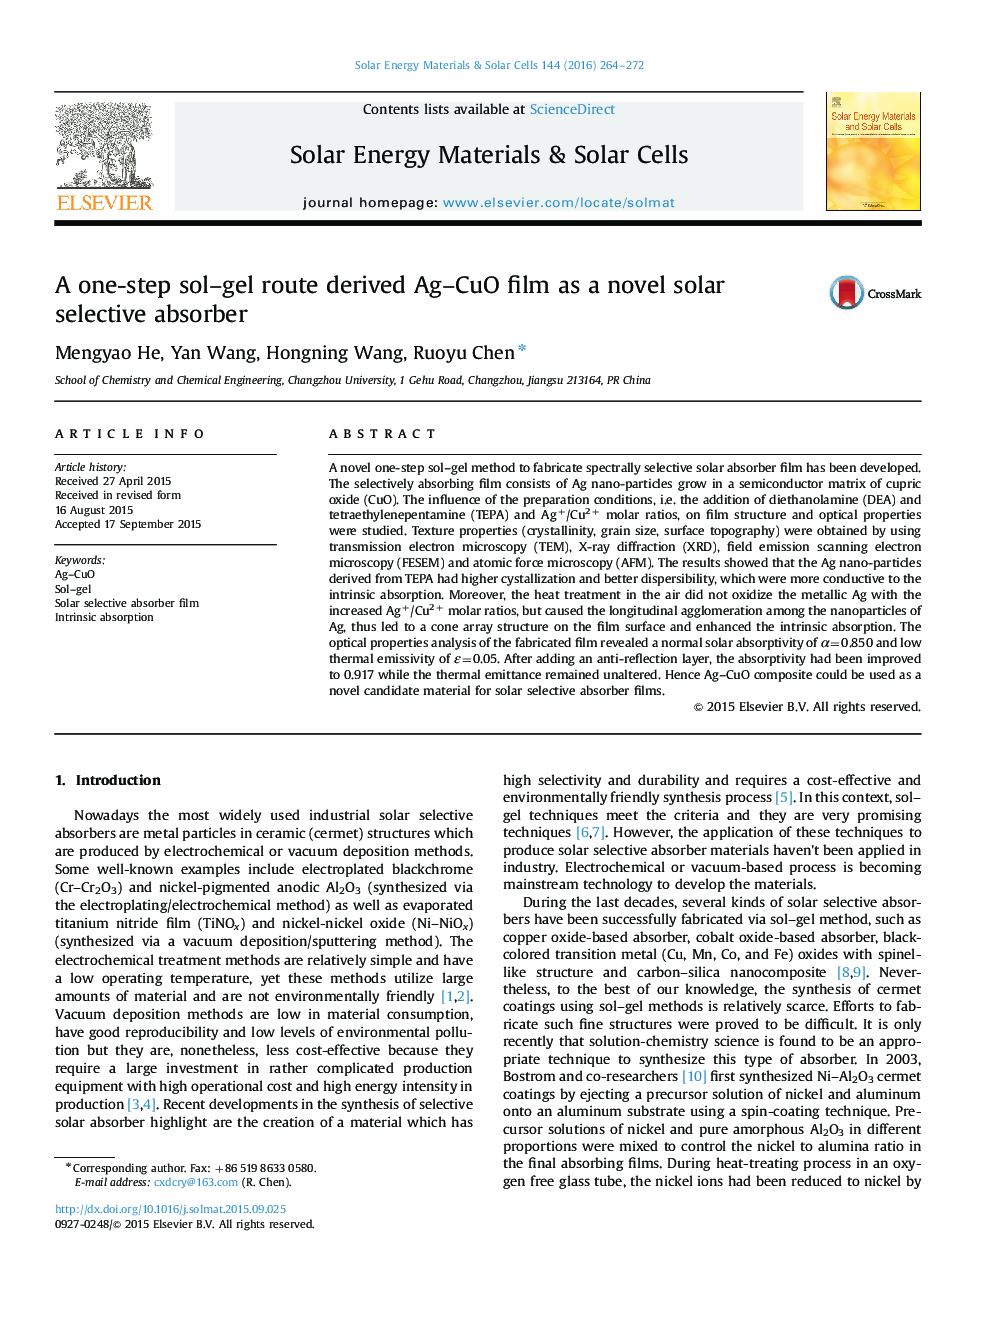 A one-step sol-gel route derived Ag-CuO film as a novel solar selective absorber